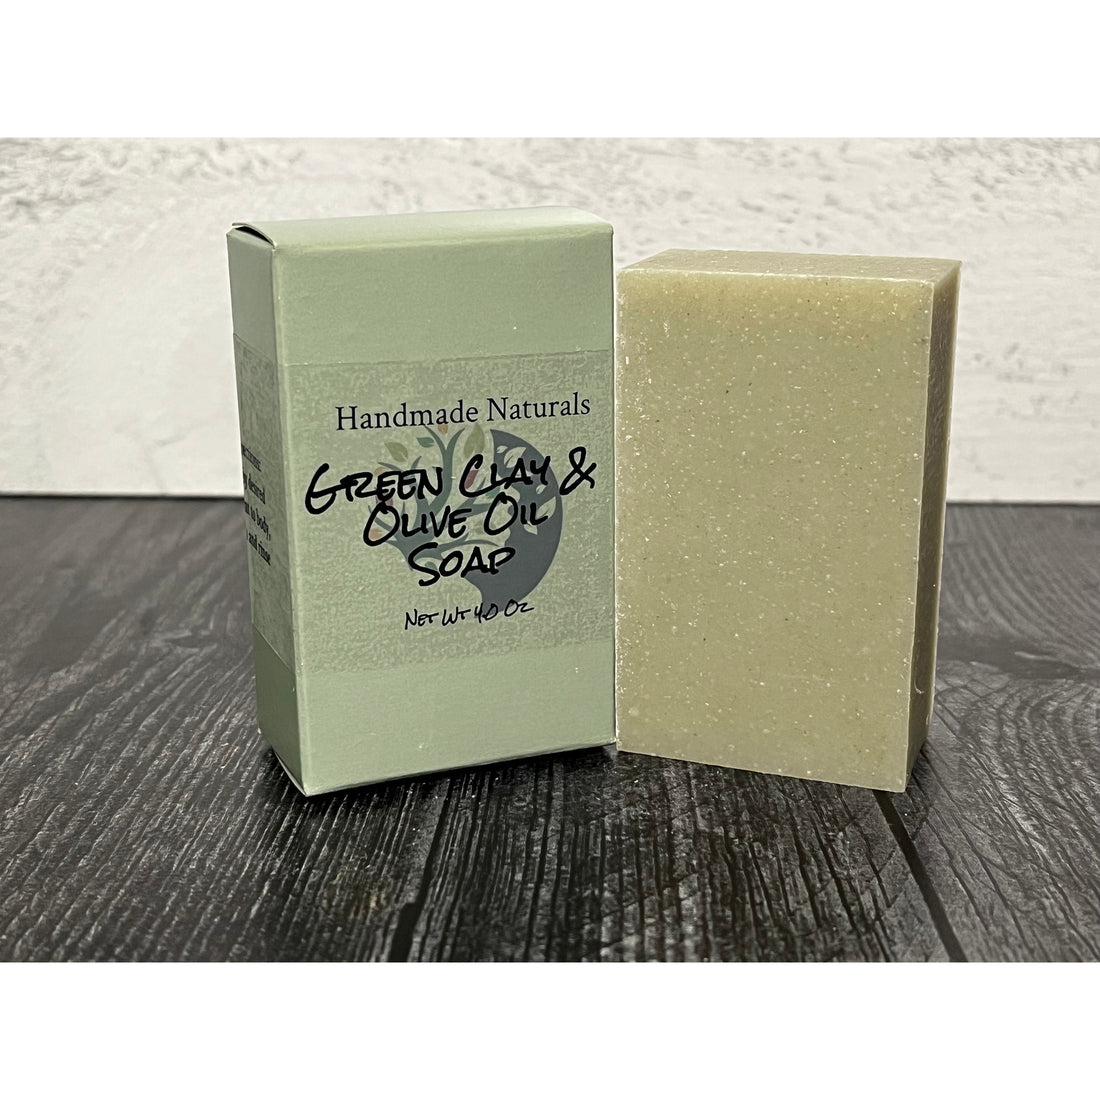 Green Clay & Olive Oil Soap-Handmade Naturals Inc